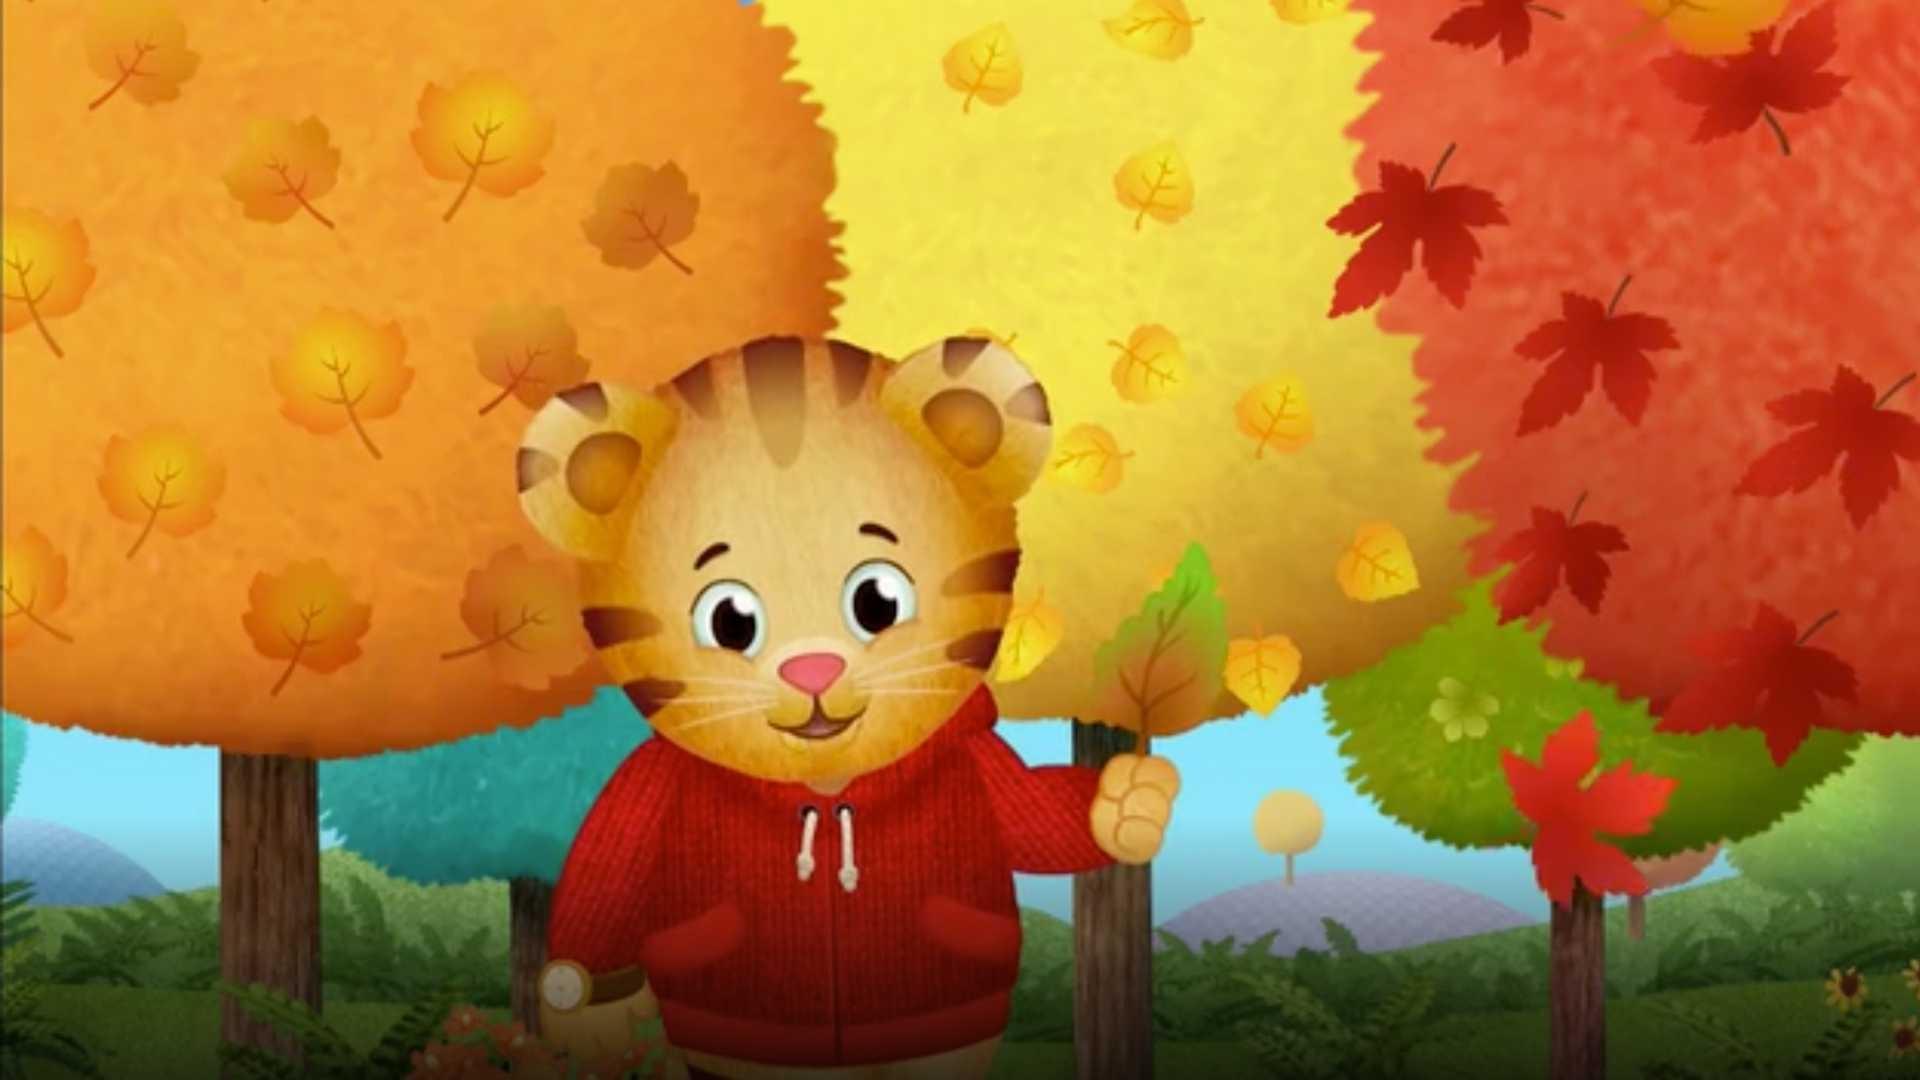 Daniel Tiger with autumn trees in the background